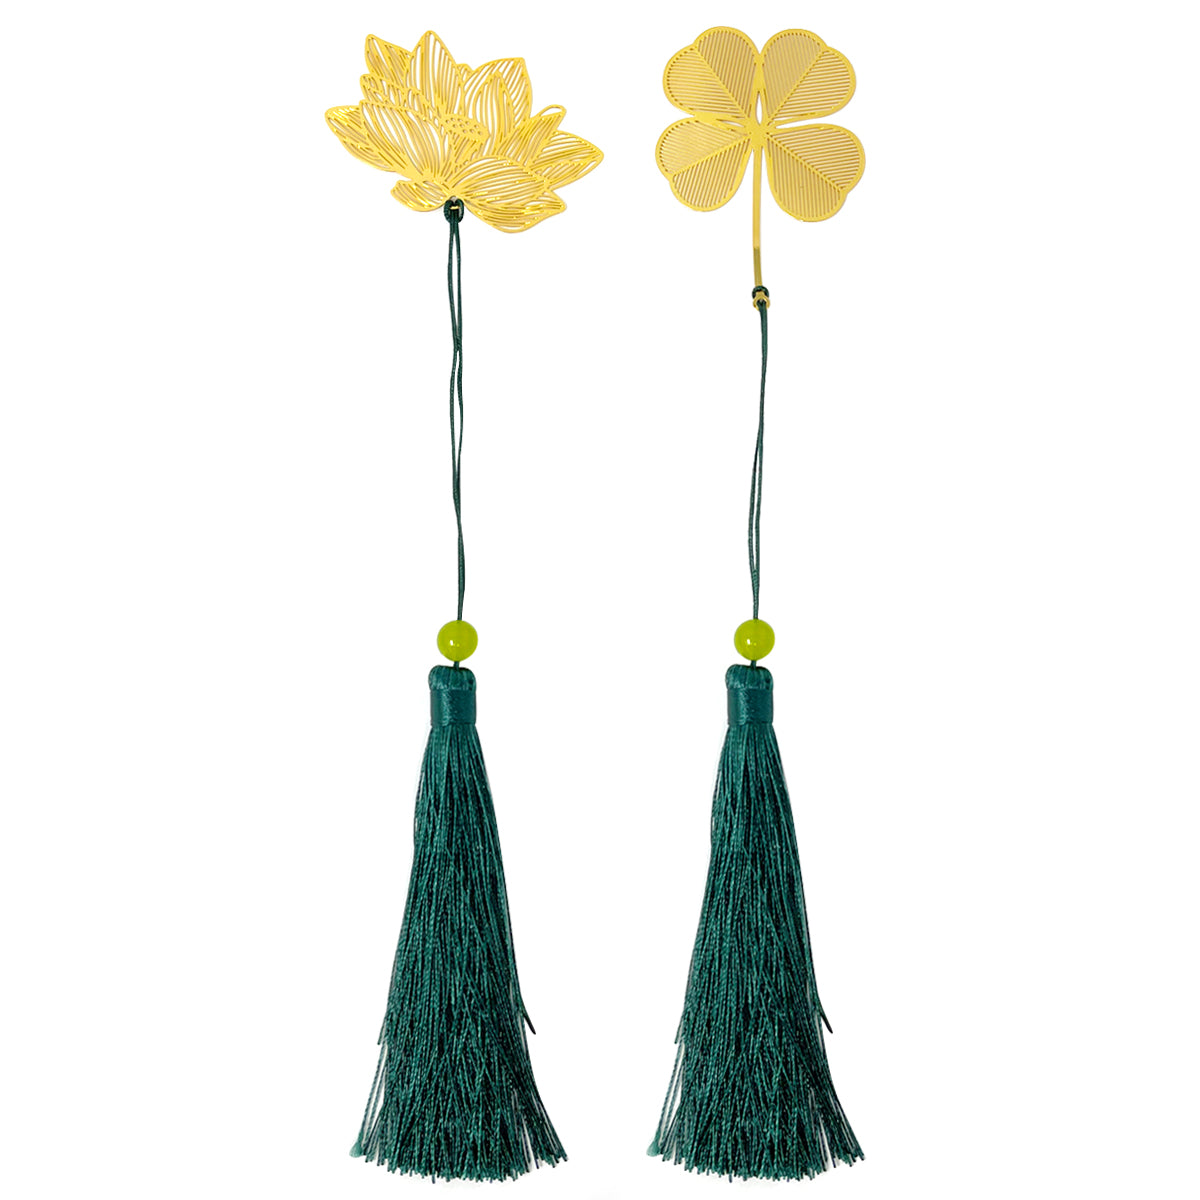 Wrapables Metallic Bookmark with Tassel for Book Lovers & Readers (Set of 2), Lotus & Clover